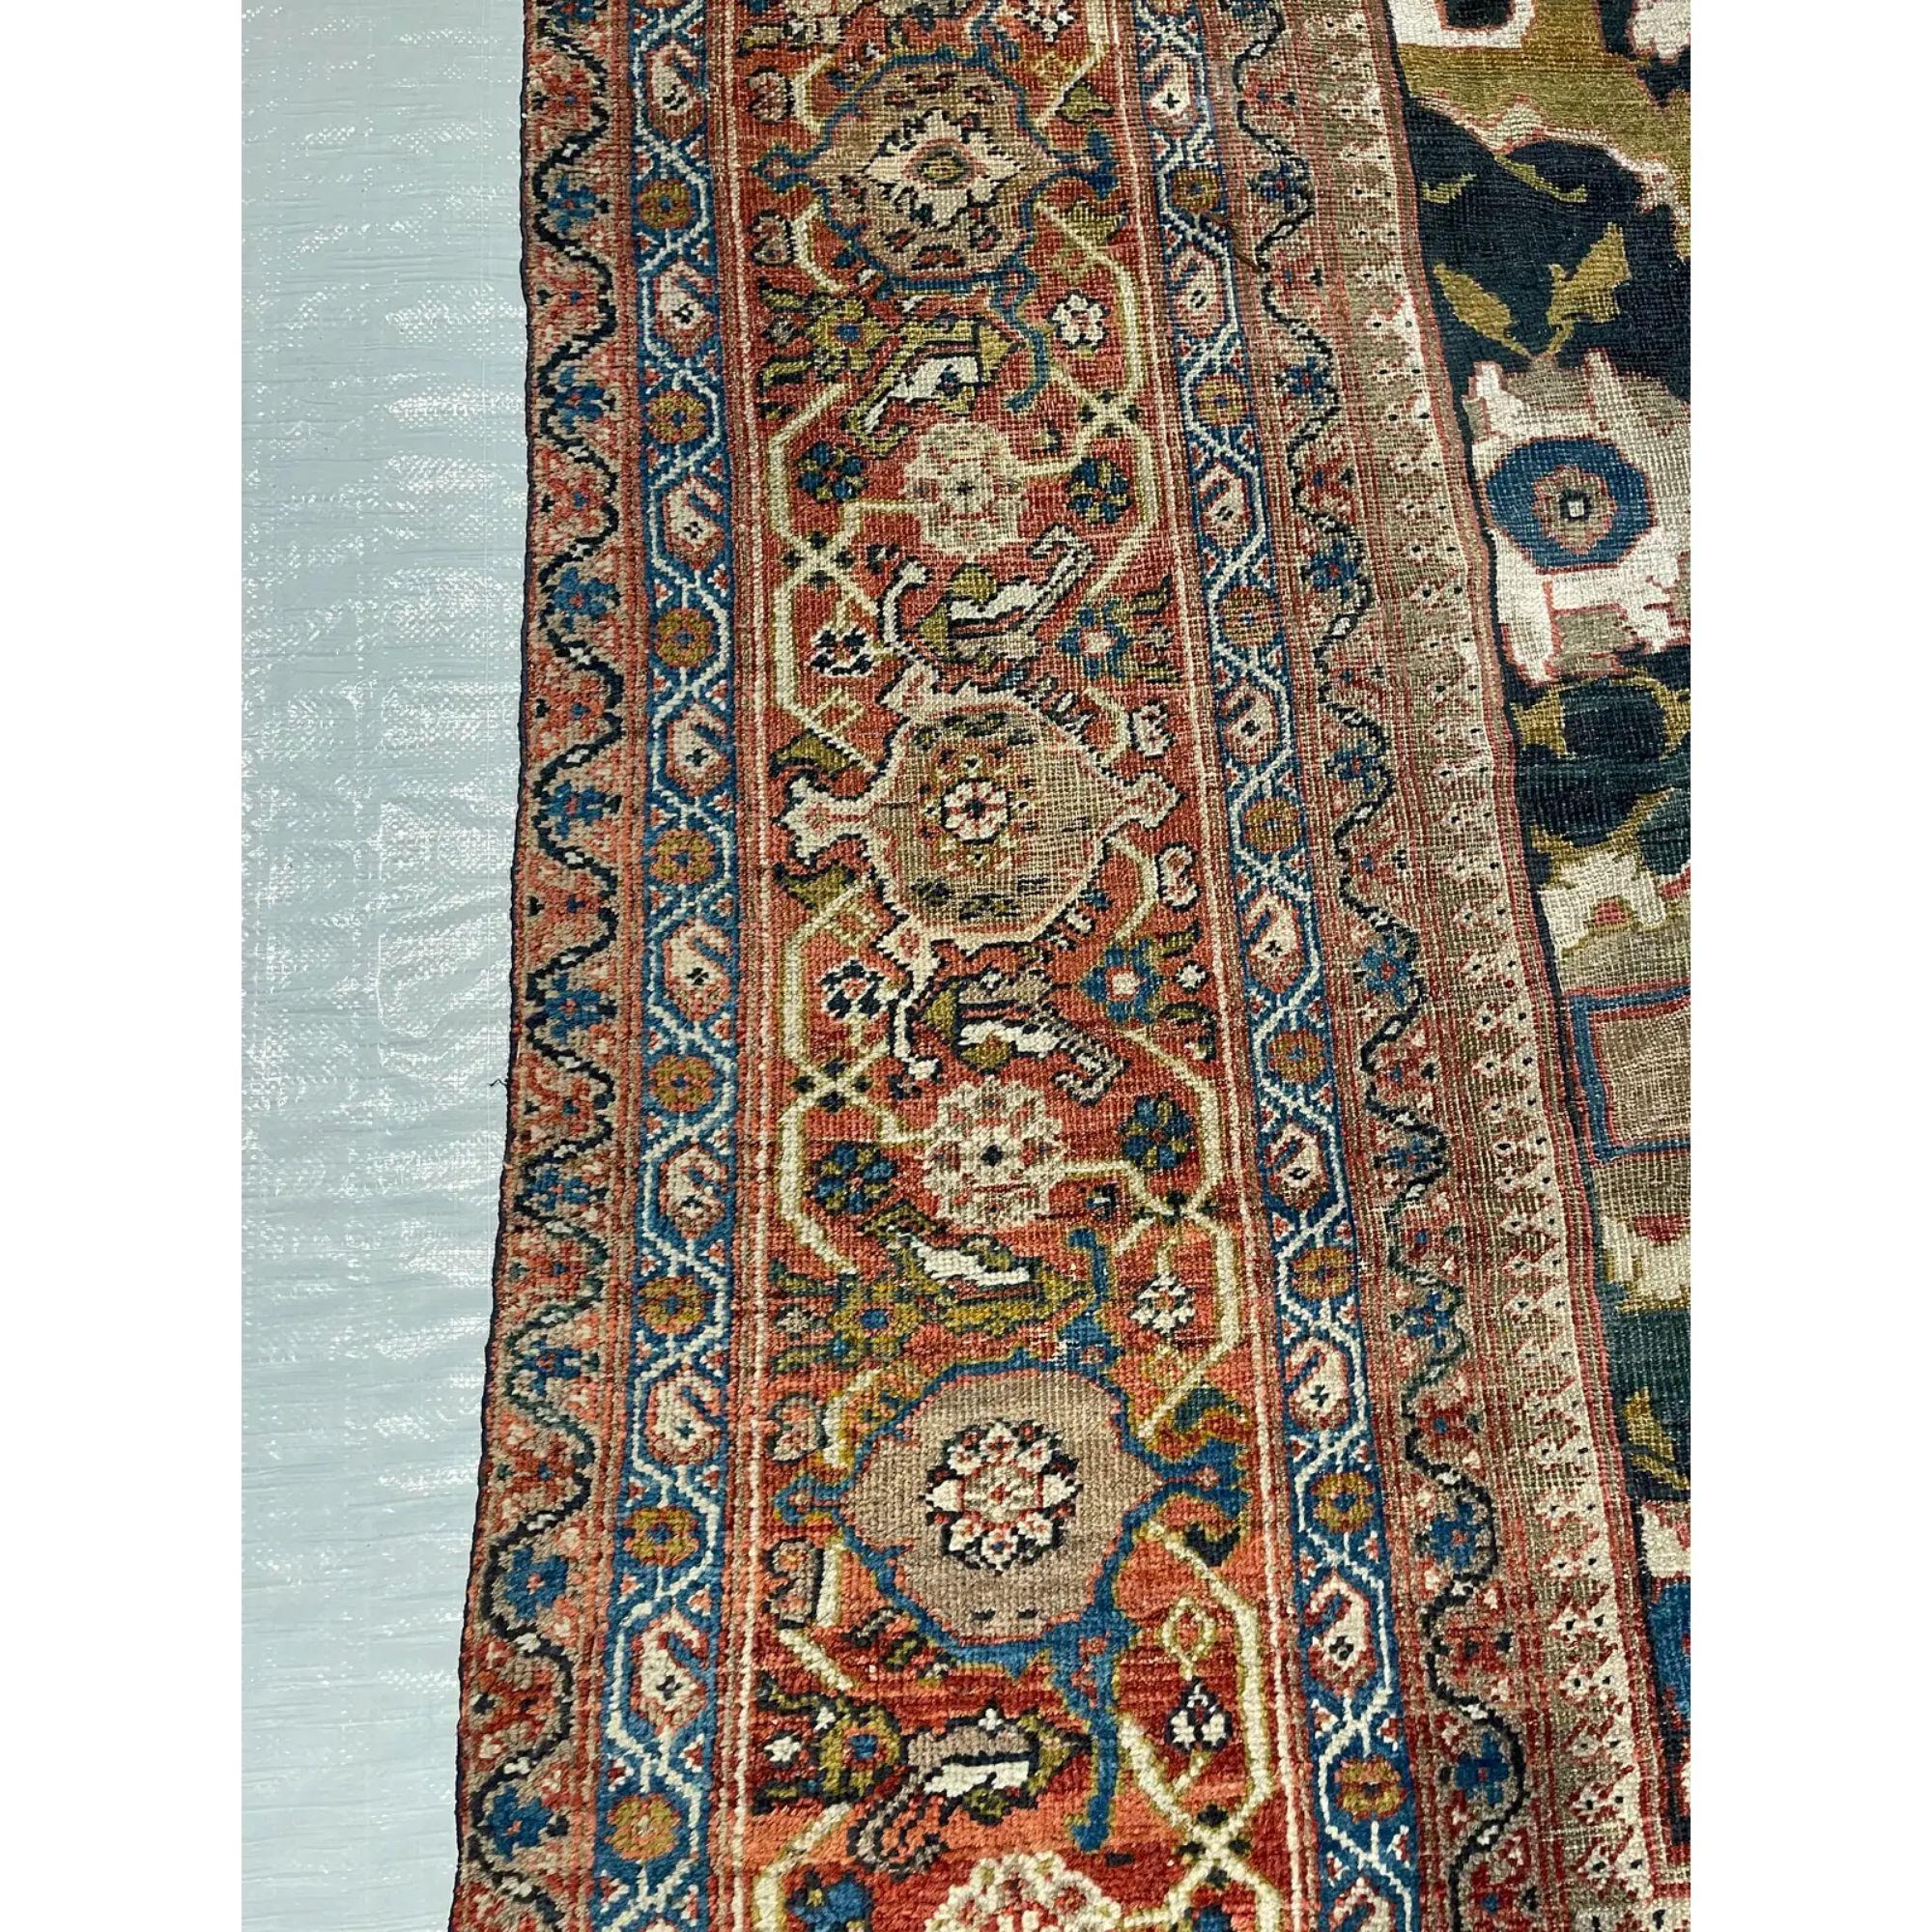 Ziegler Sultanabad Rugs – These incredible Persian carpets were woven in Sultanabad around the 19th century’s last quarter, with the intent to appeal to more Western tastes. In the late 1800’s, in Sultanabad, a small town in NW Persia, a Swiss firm,